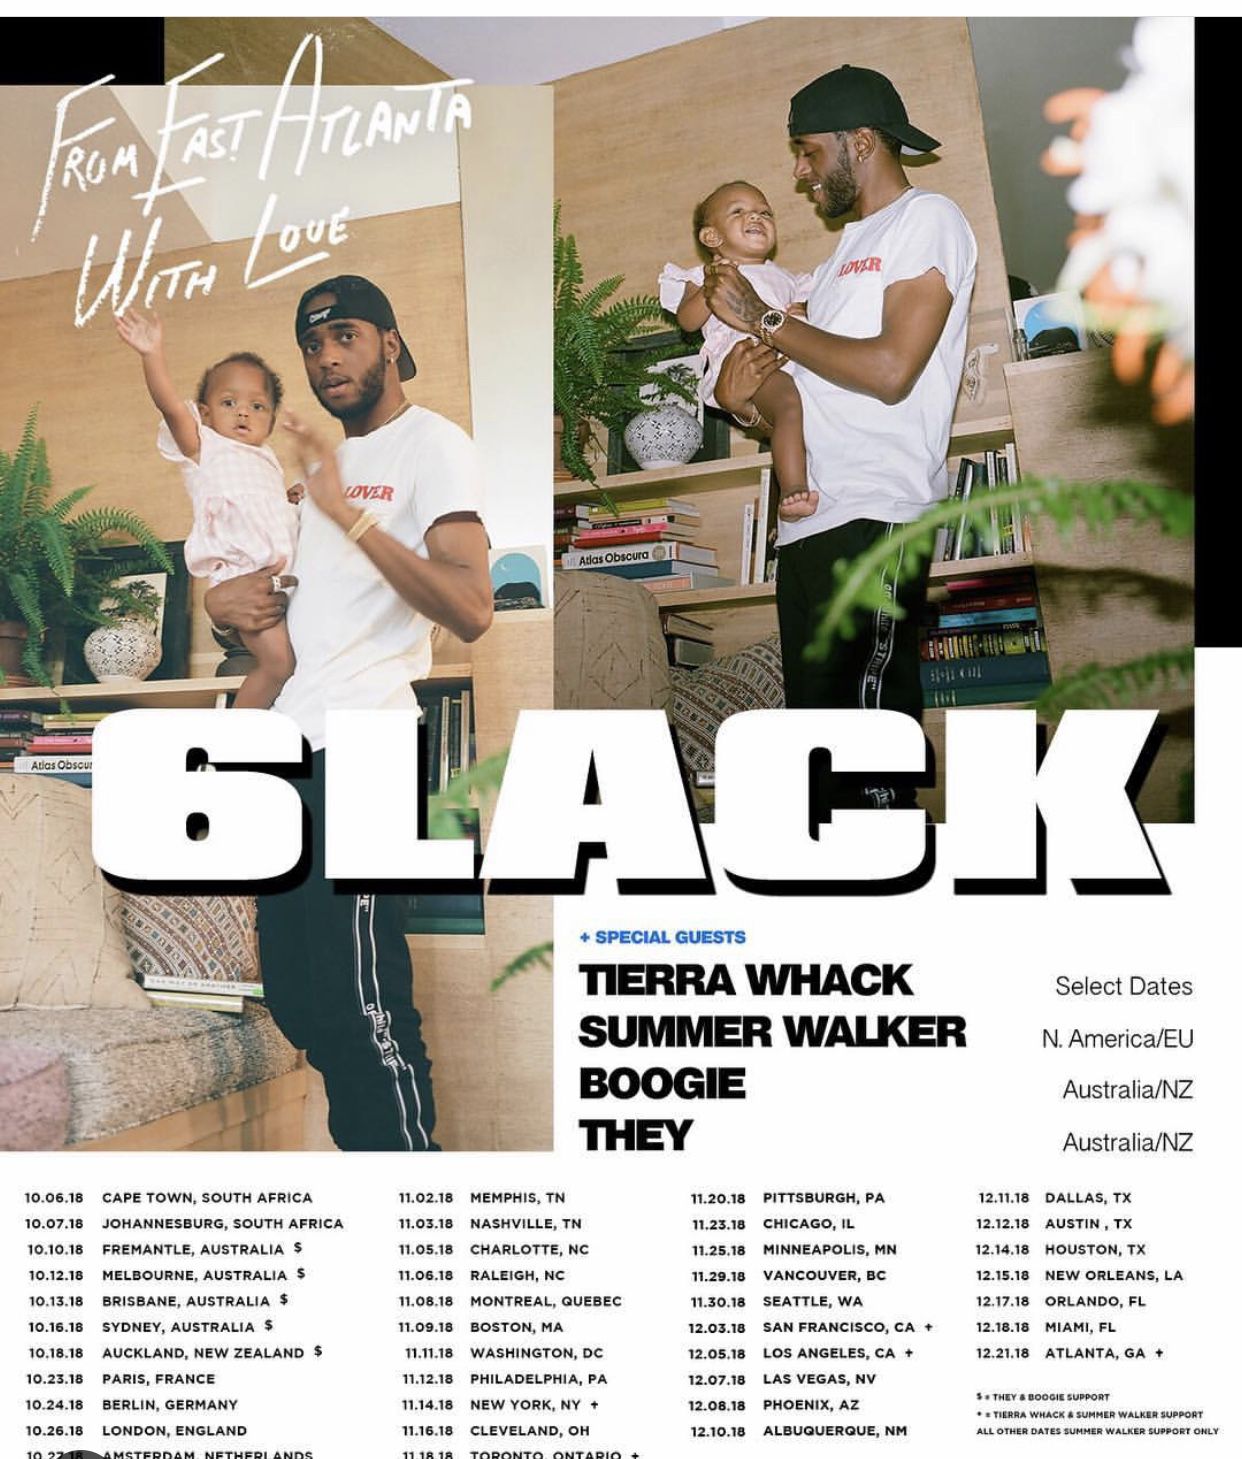 6lack November 11th @ The anthem in DC (2 tickets 30 each)